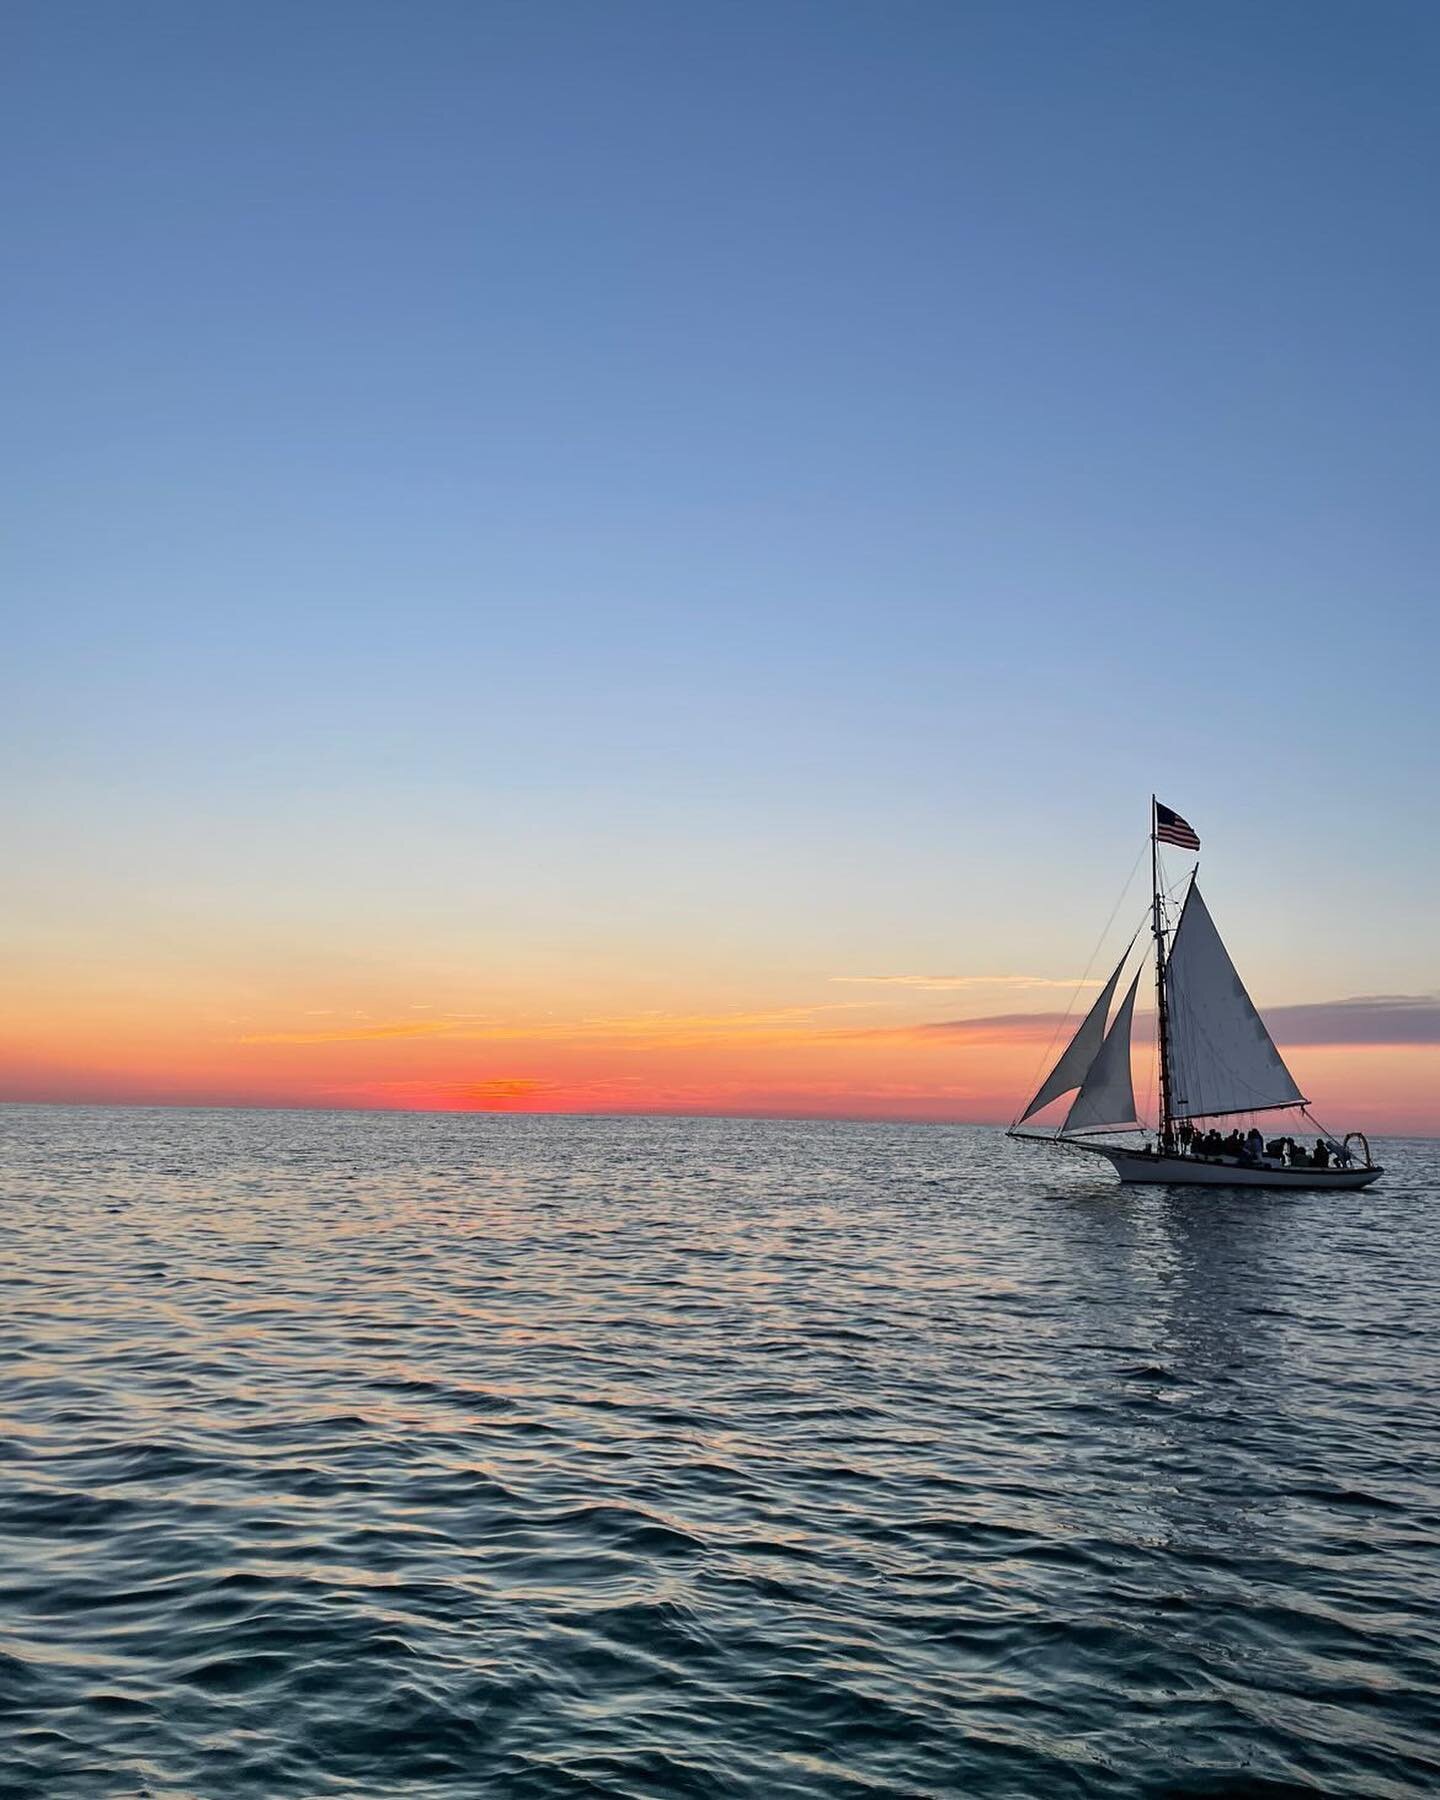 We love this shot of Endeavor under sail from @ack_realestate! Headed back to the harbour after another beautiful day on the water ✨